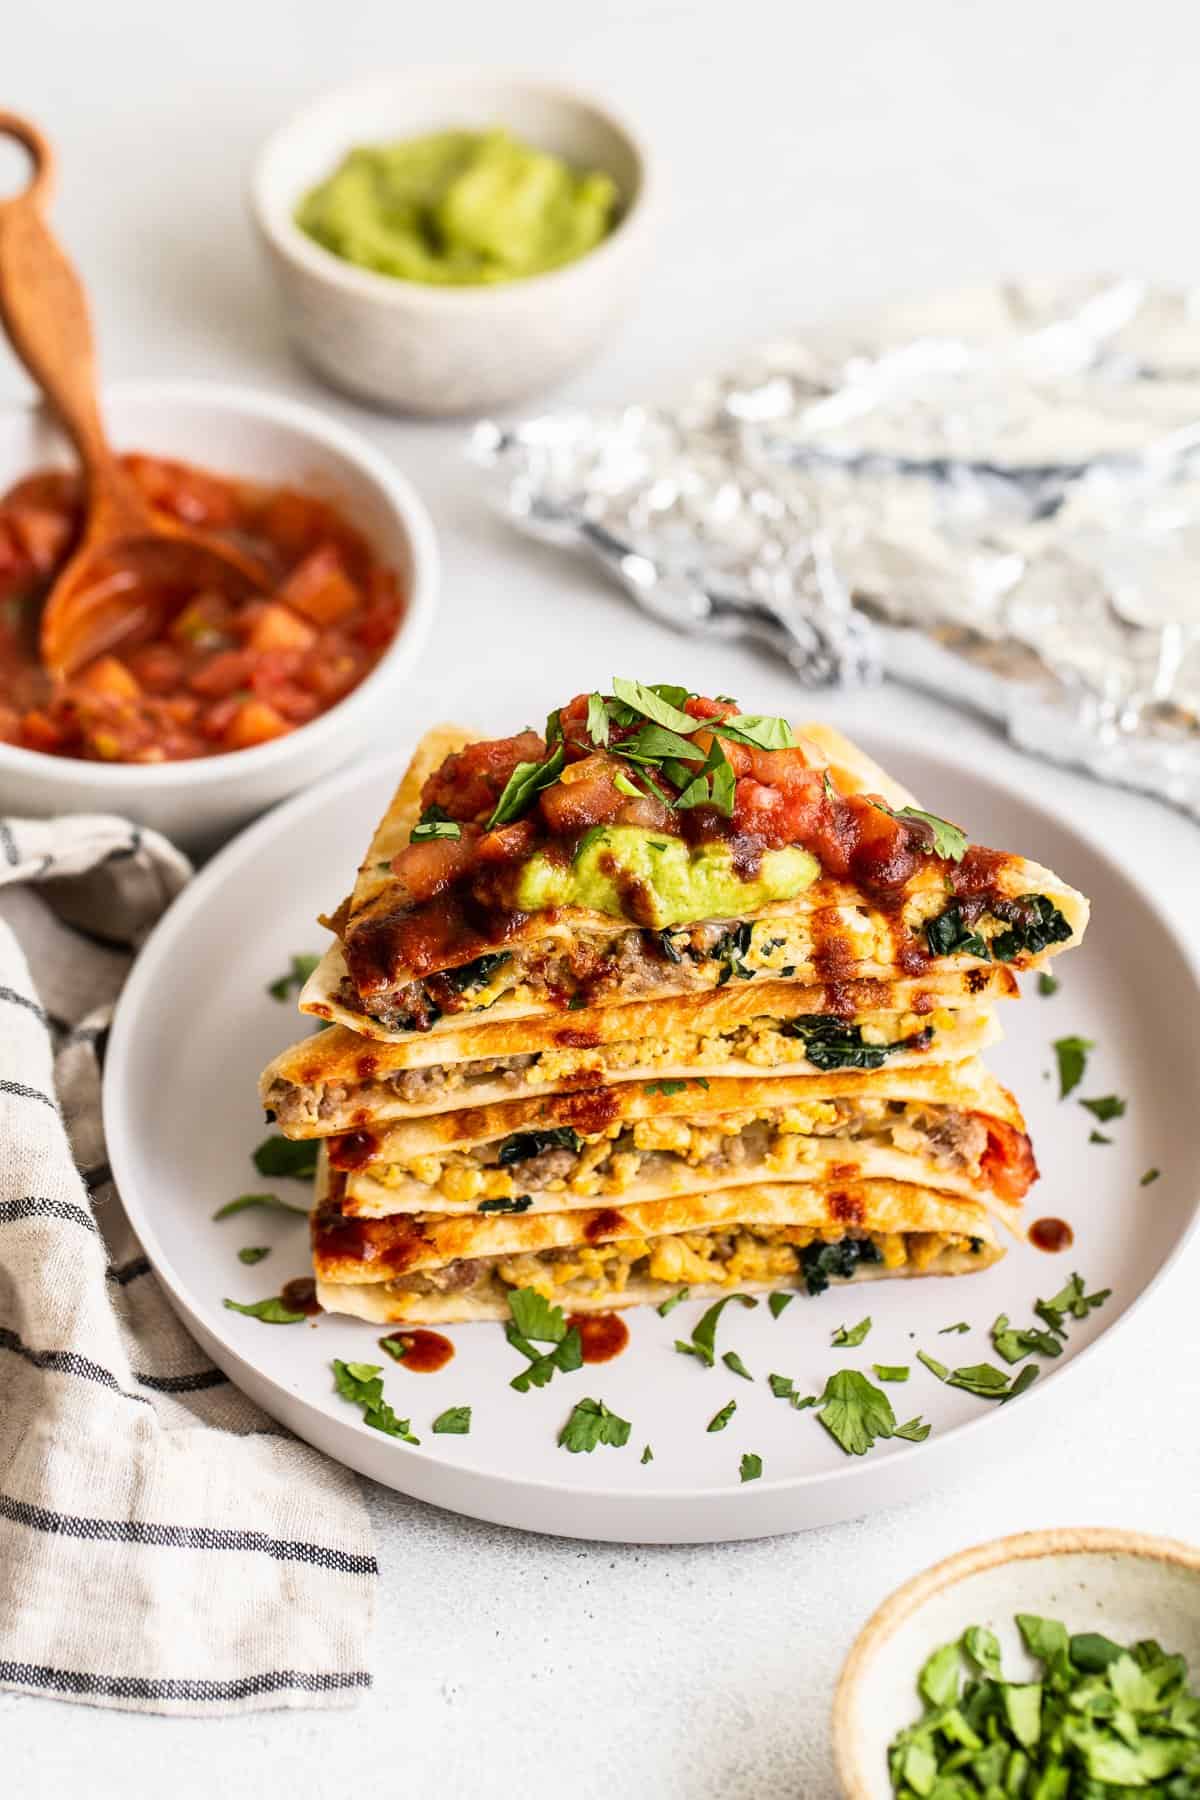 Slices of breakfast quesadillas on a plate topped with salsa and guacamole.